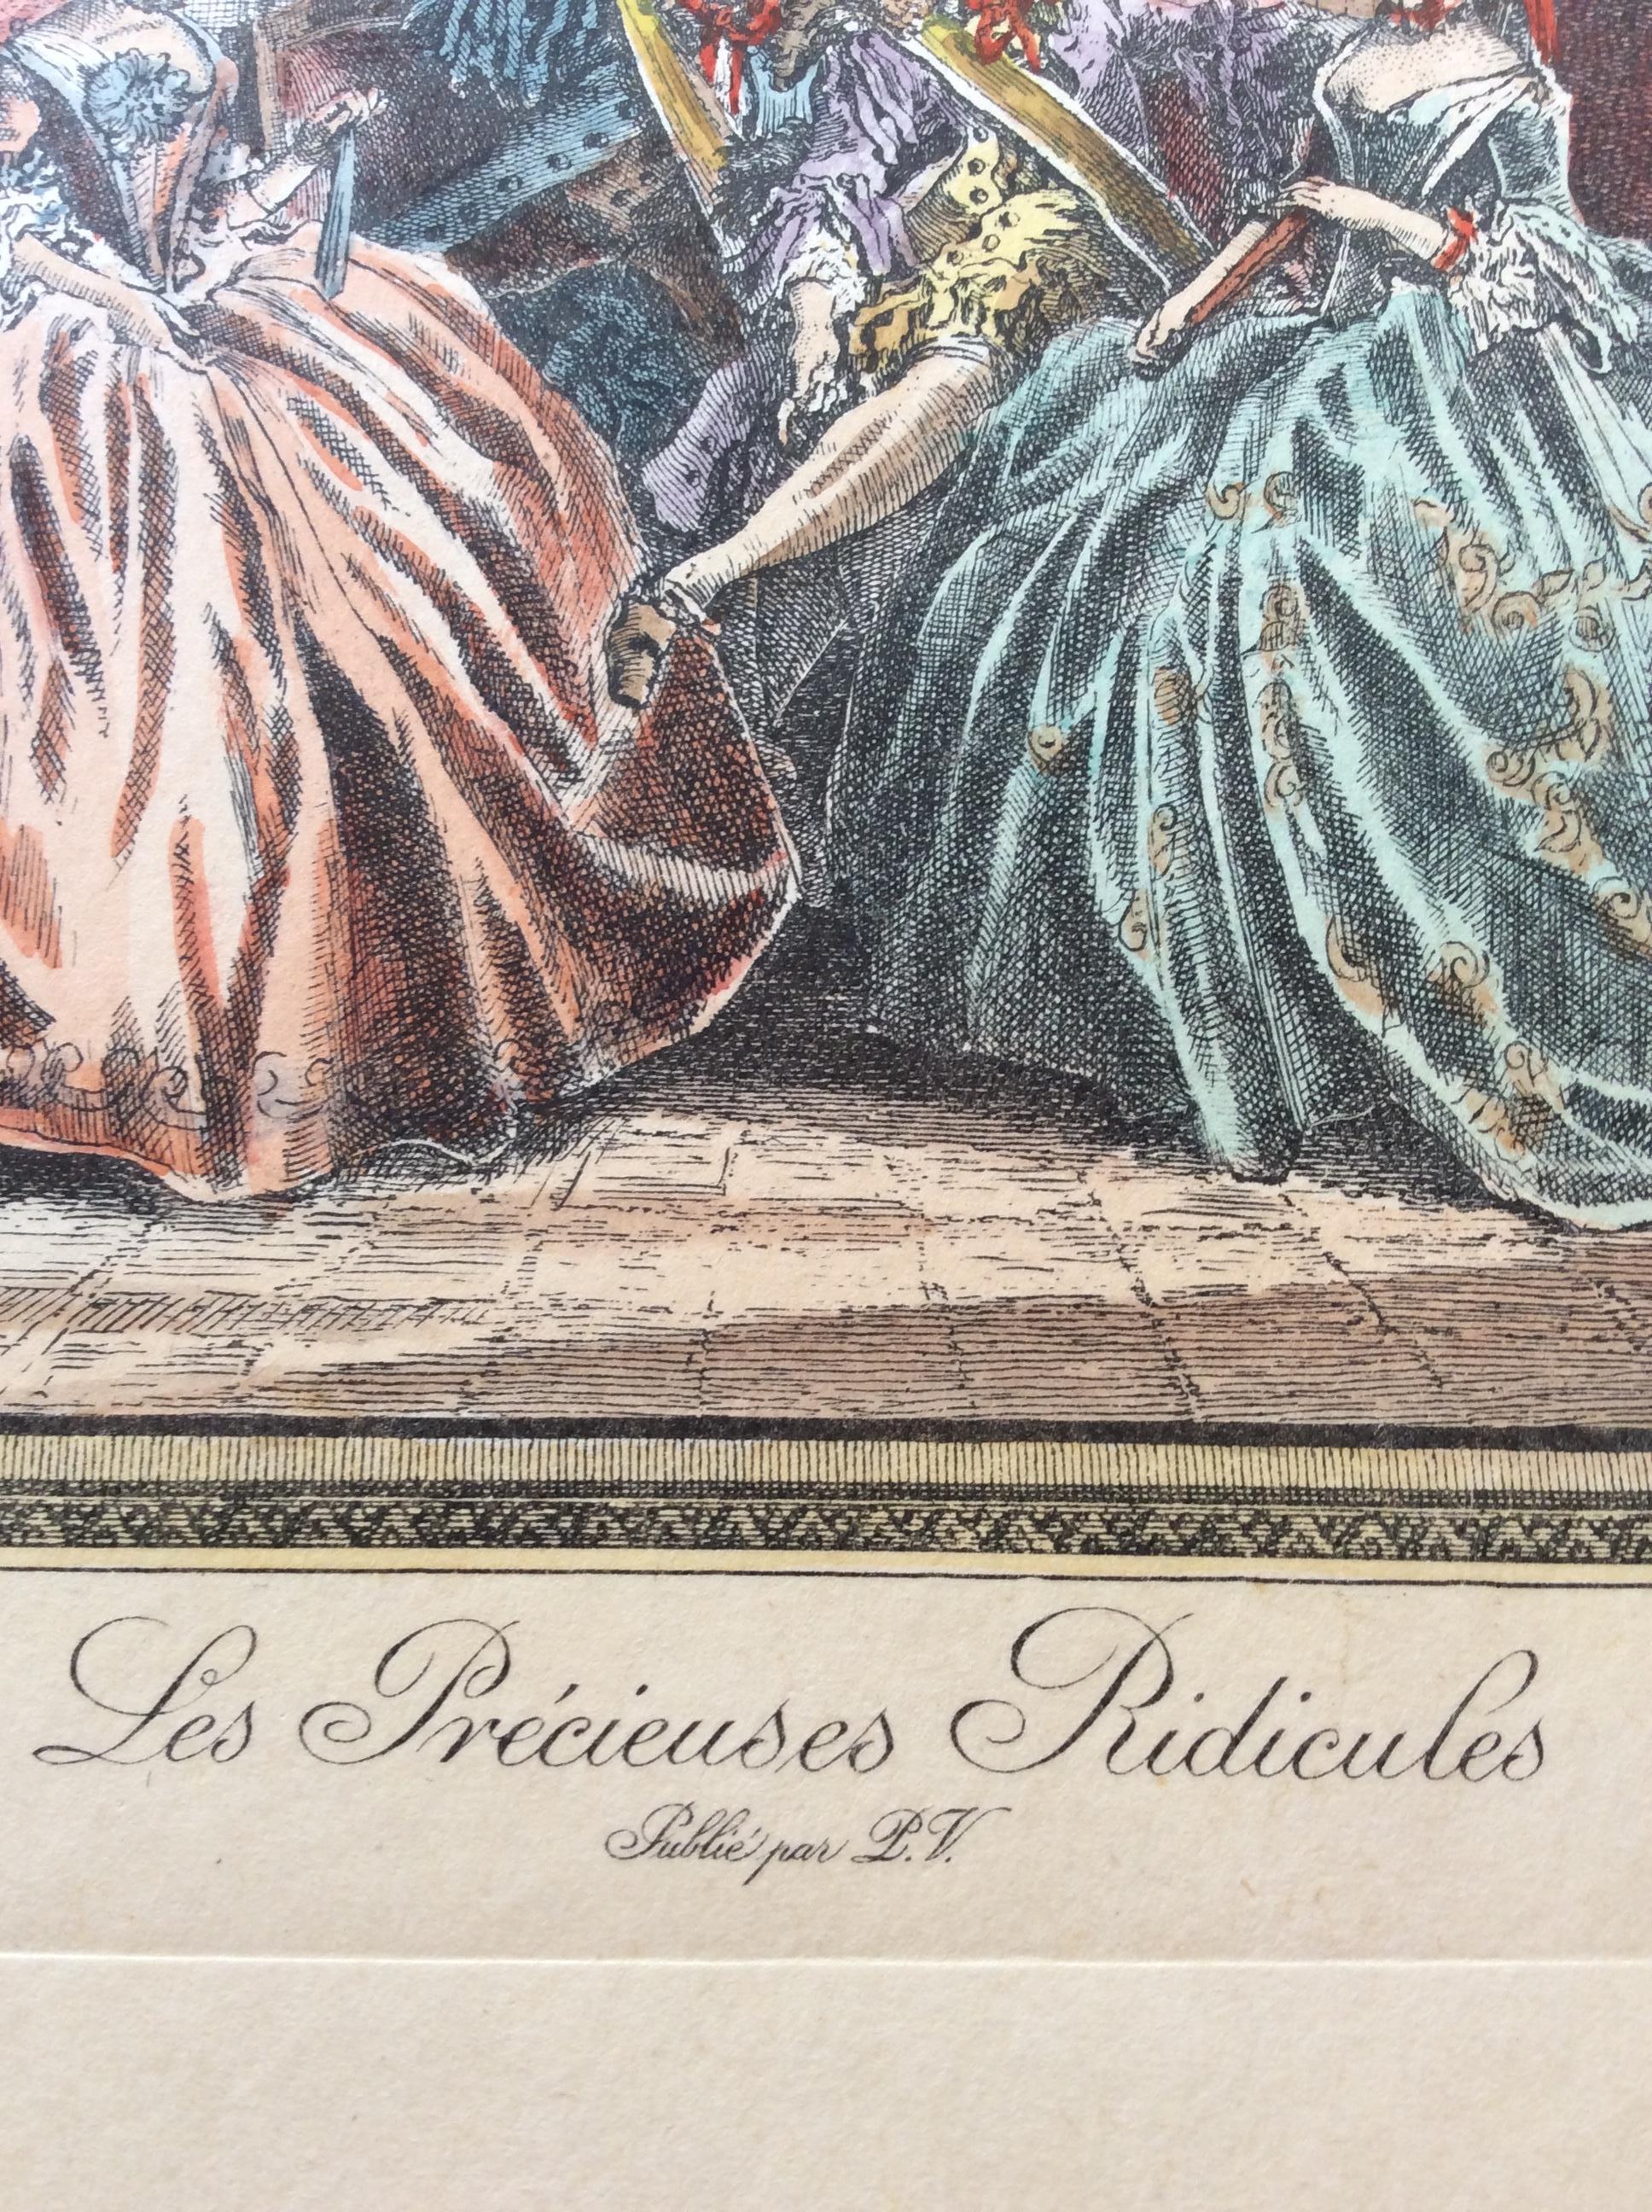 A fine crisp impression of great rarity; it is particularly unusual to find a 18th century color engraving print of this quality and condition in today’s print market.

Rare engraving print by famed artist François Boucher. François Boucher was a